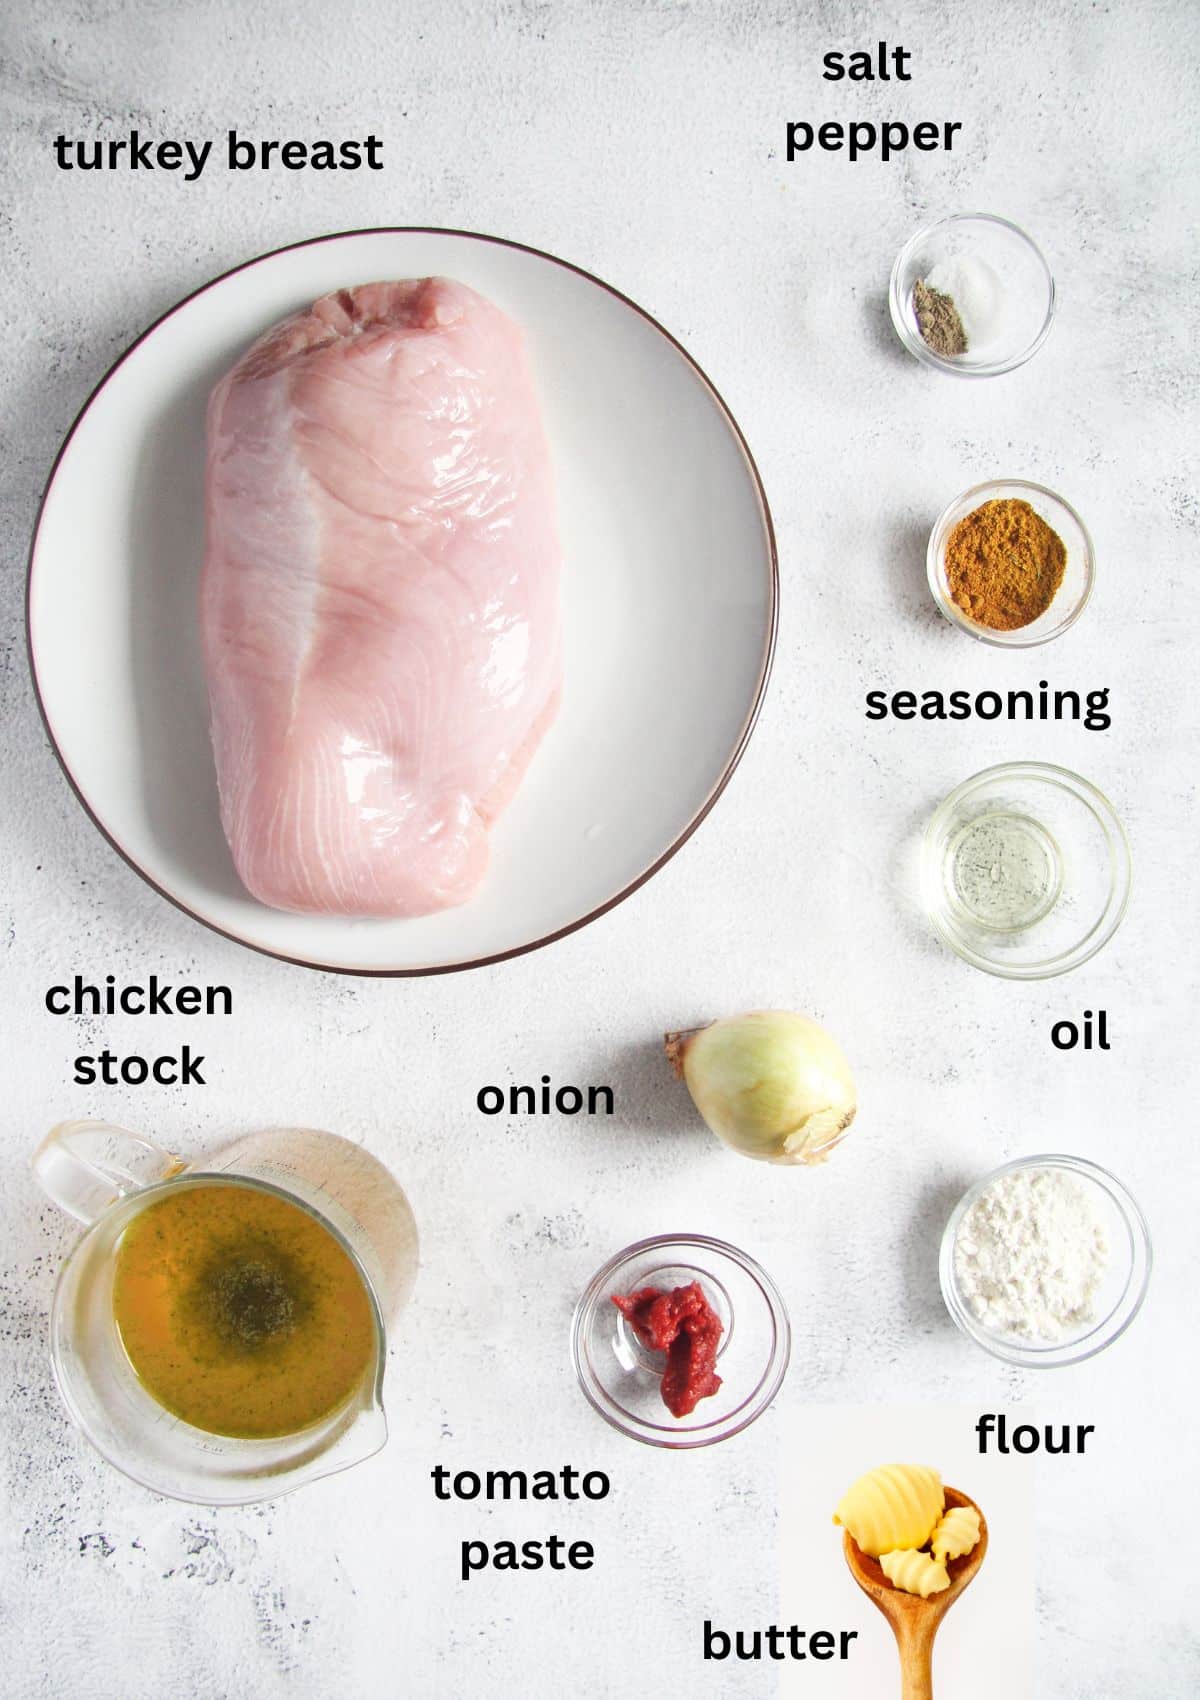 listed ingredients for roasting turkey breast and making gravy.